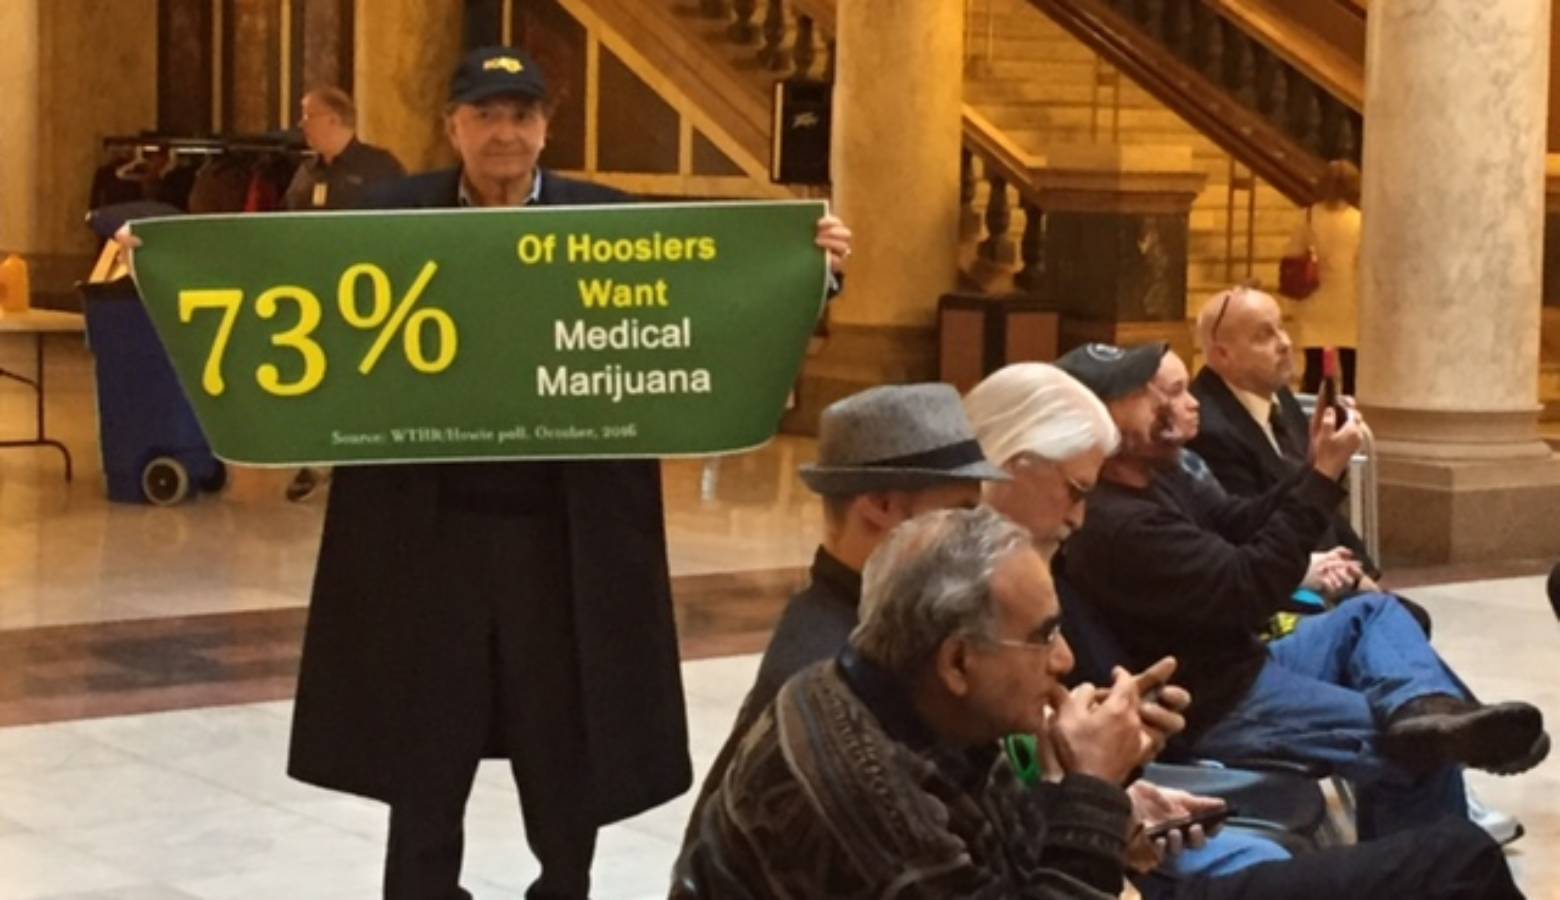 Supporters at the Statehouse meet in favor of medical cannabis. (Jill Sheridan/IPB News)